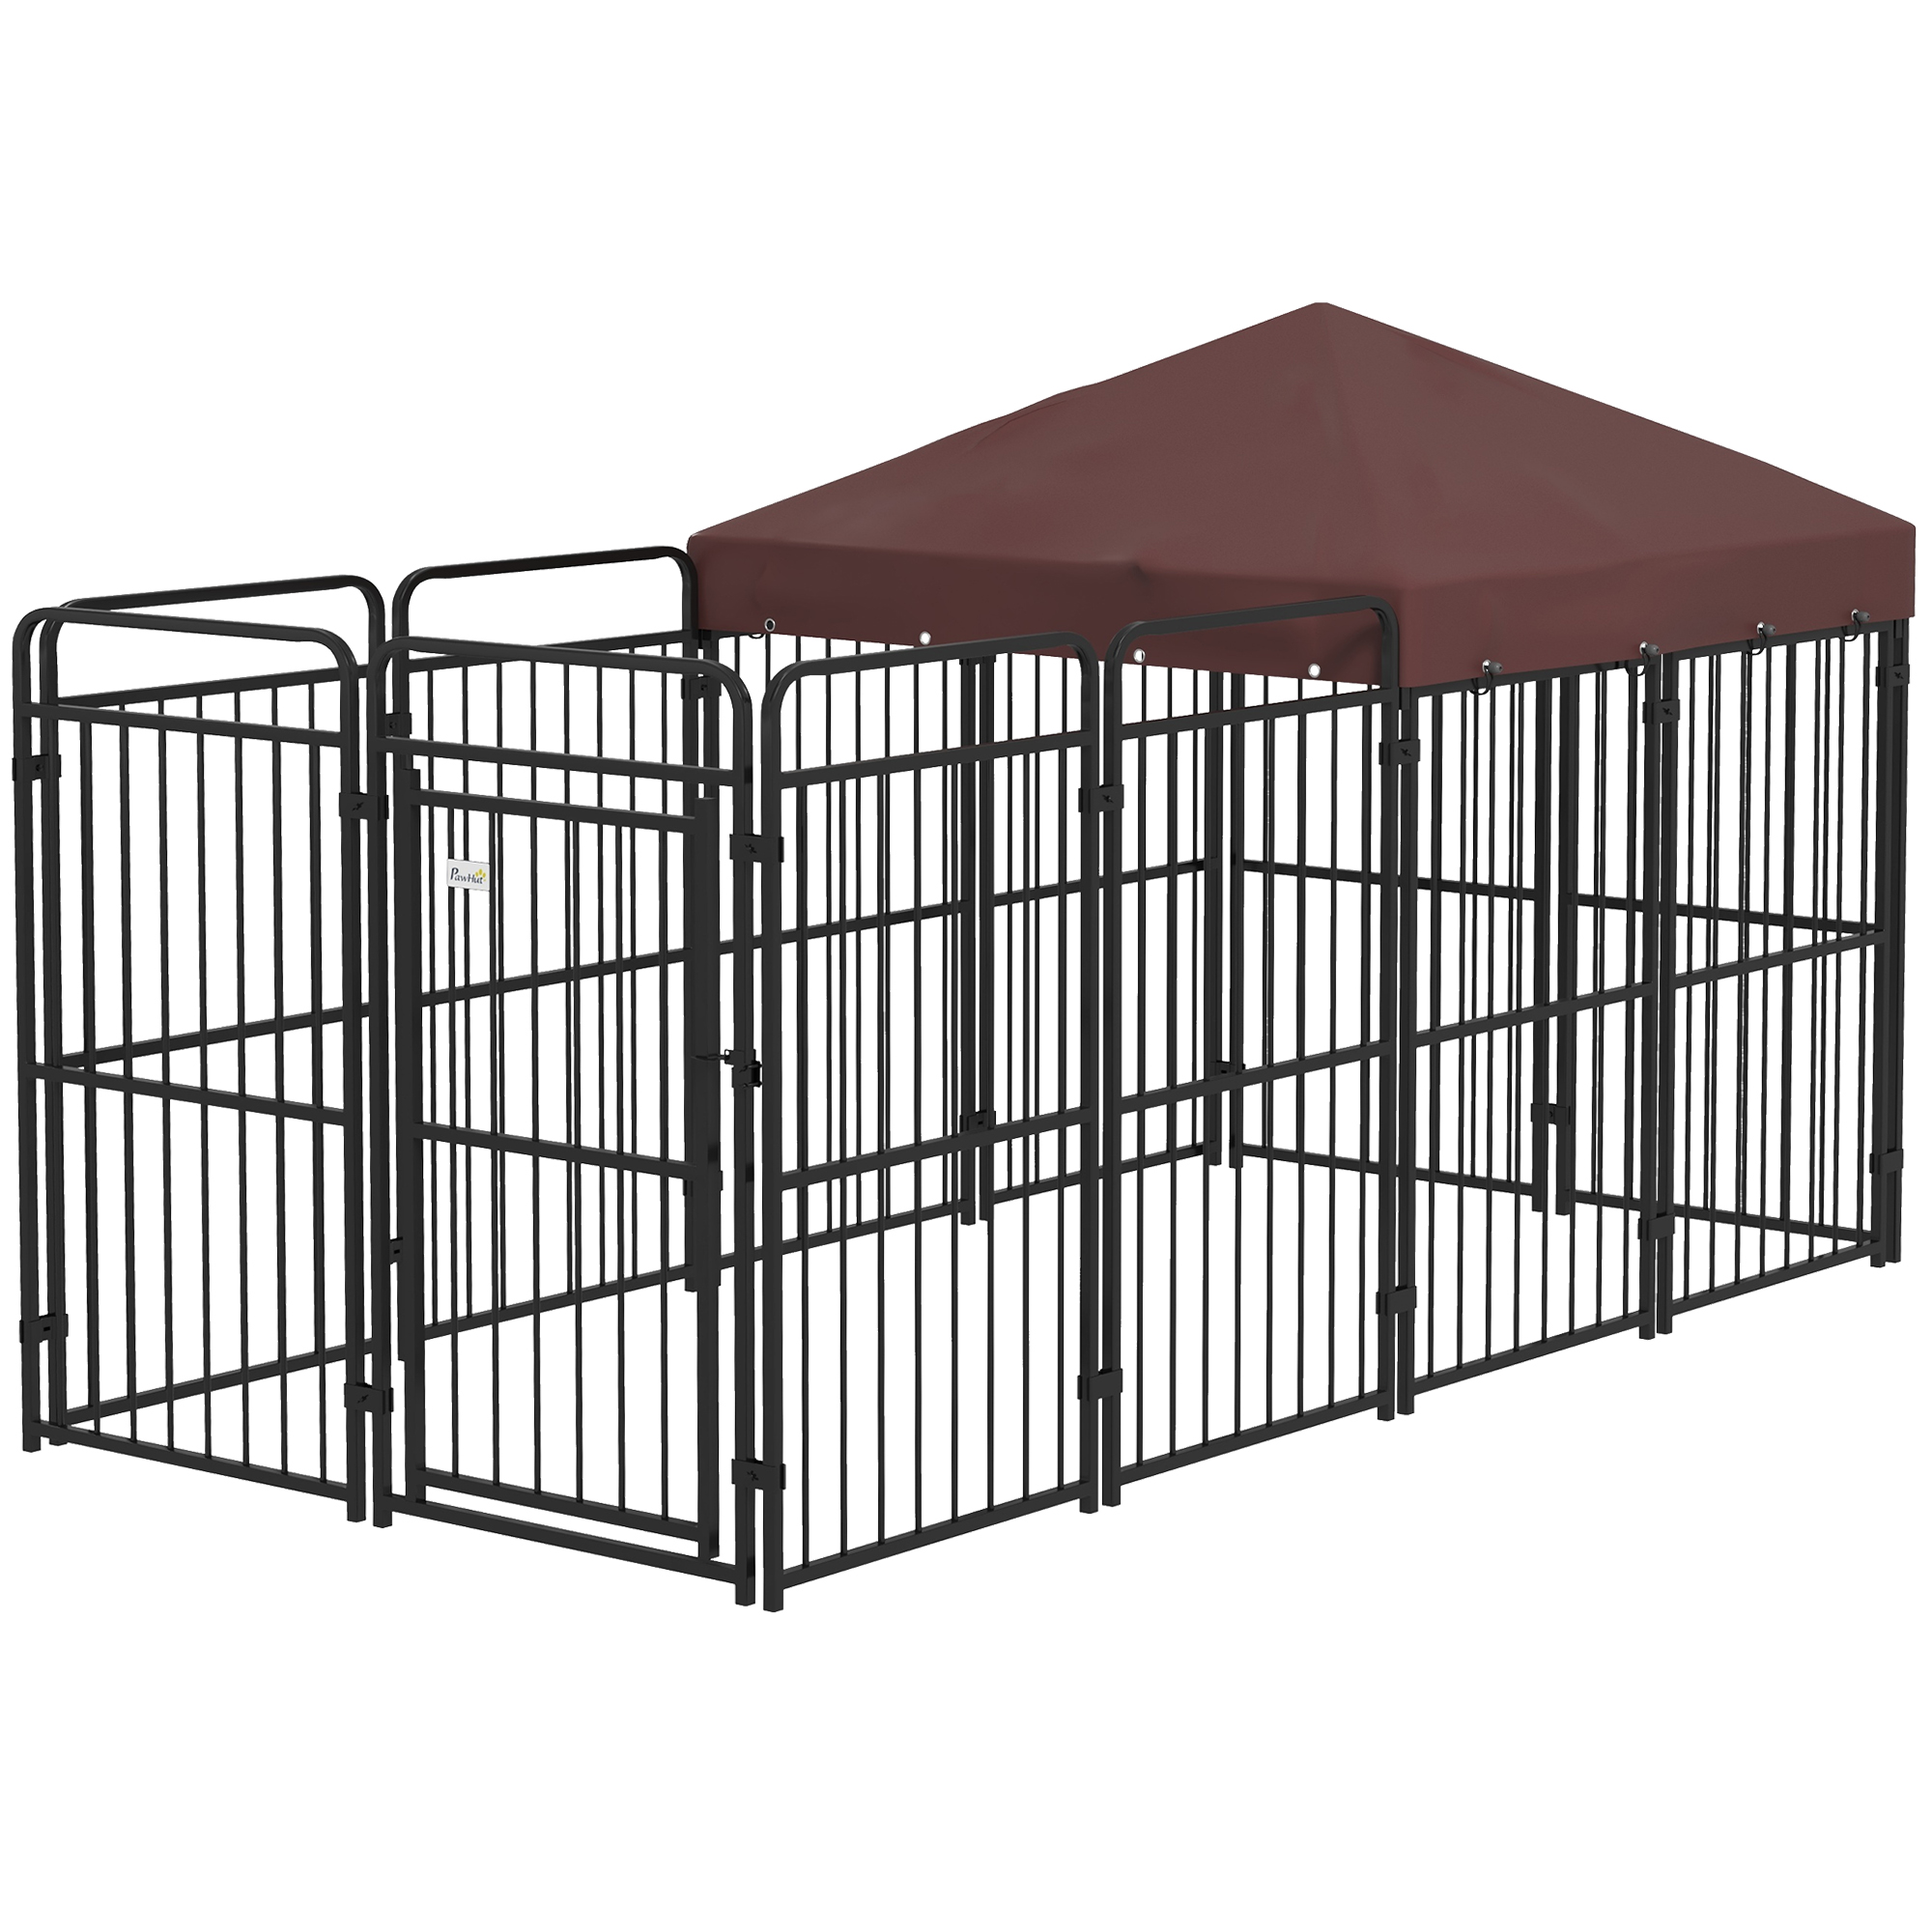 PawHut Outdoor Metal Dog Run with Roof